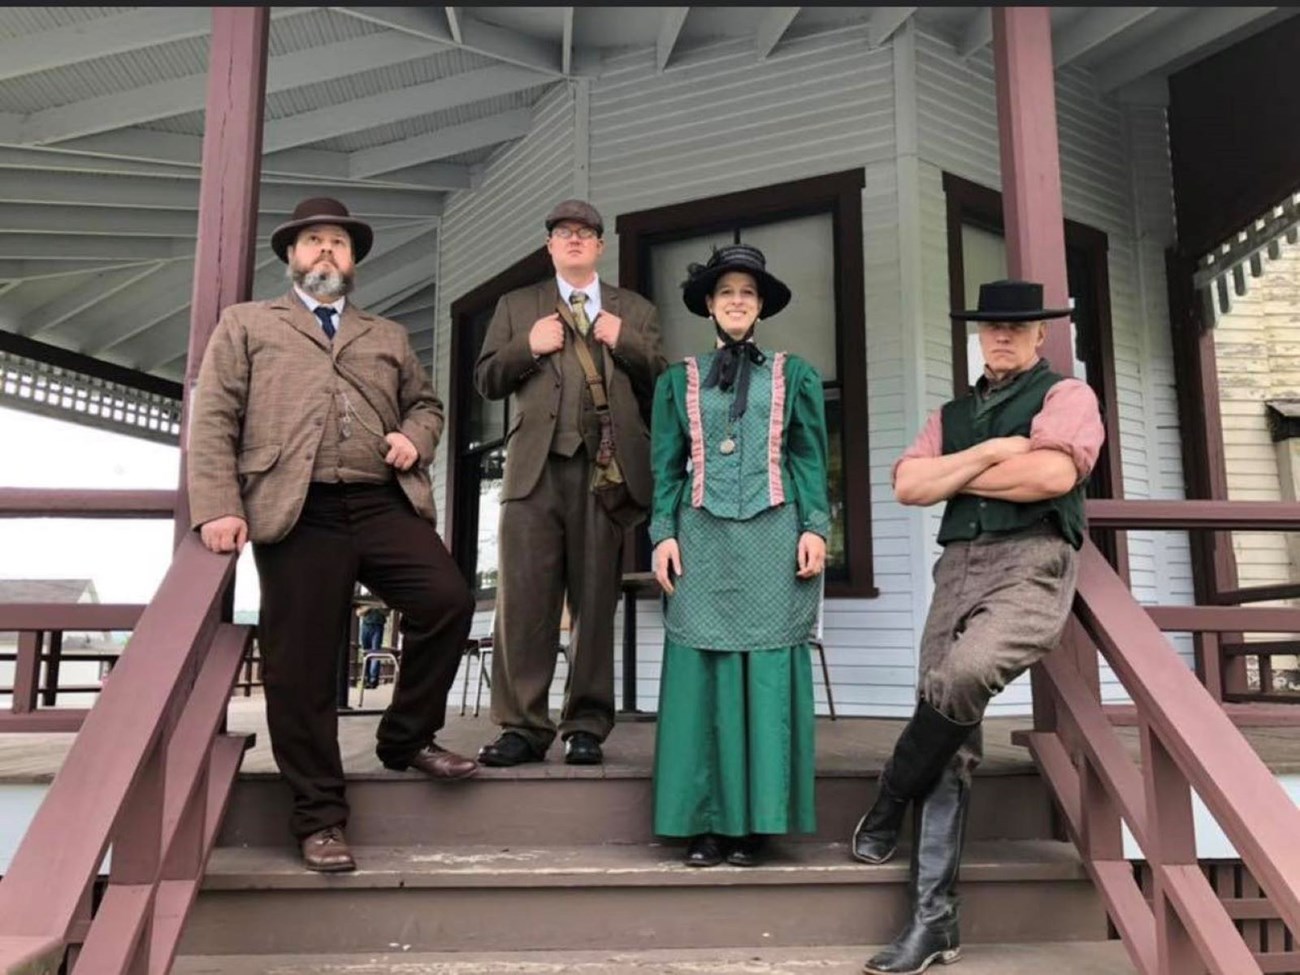 A group of park rangers in costume on the clubhouse porch.